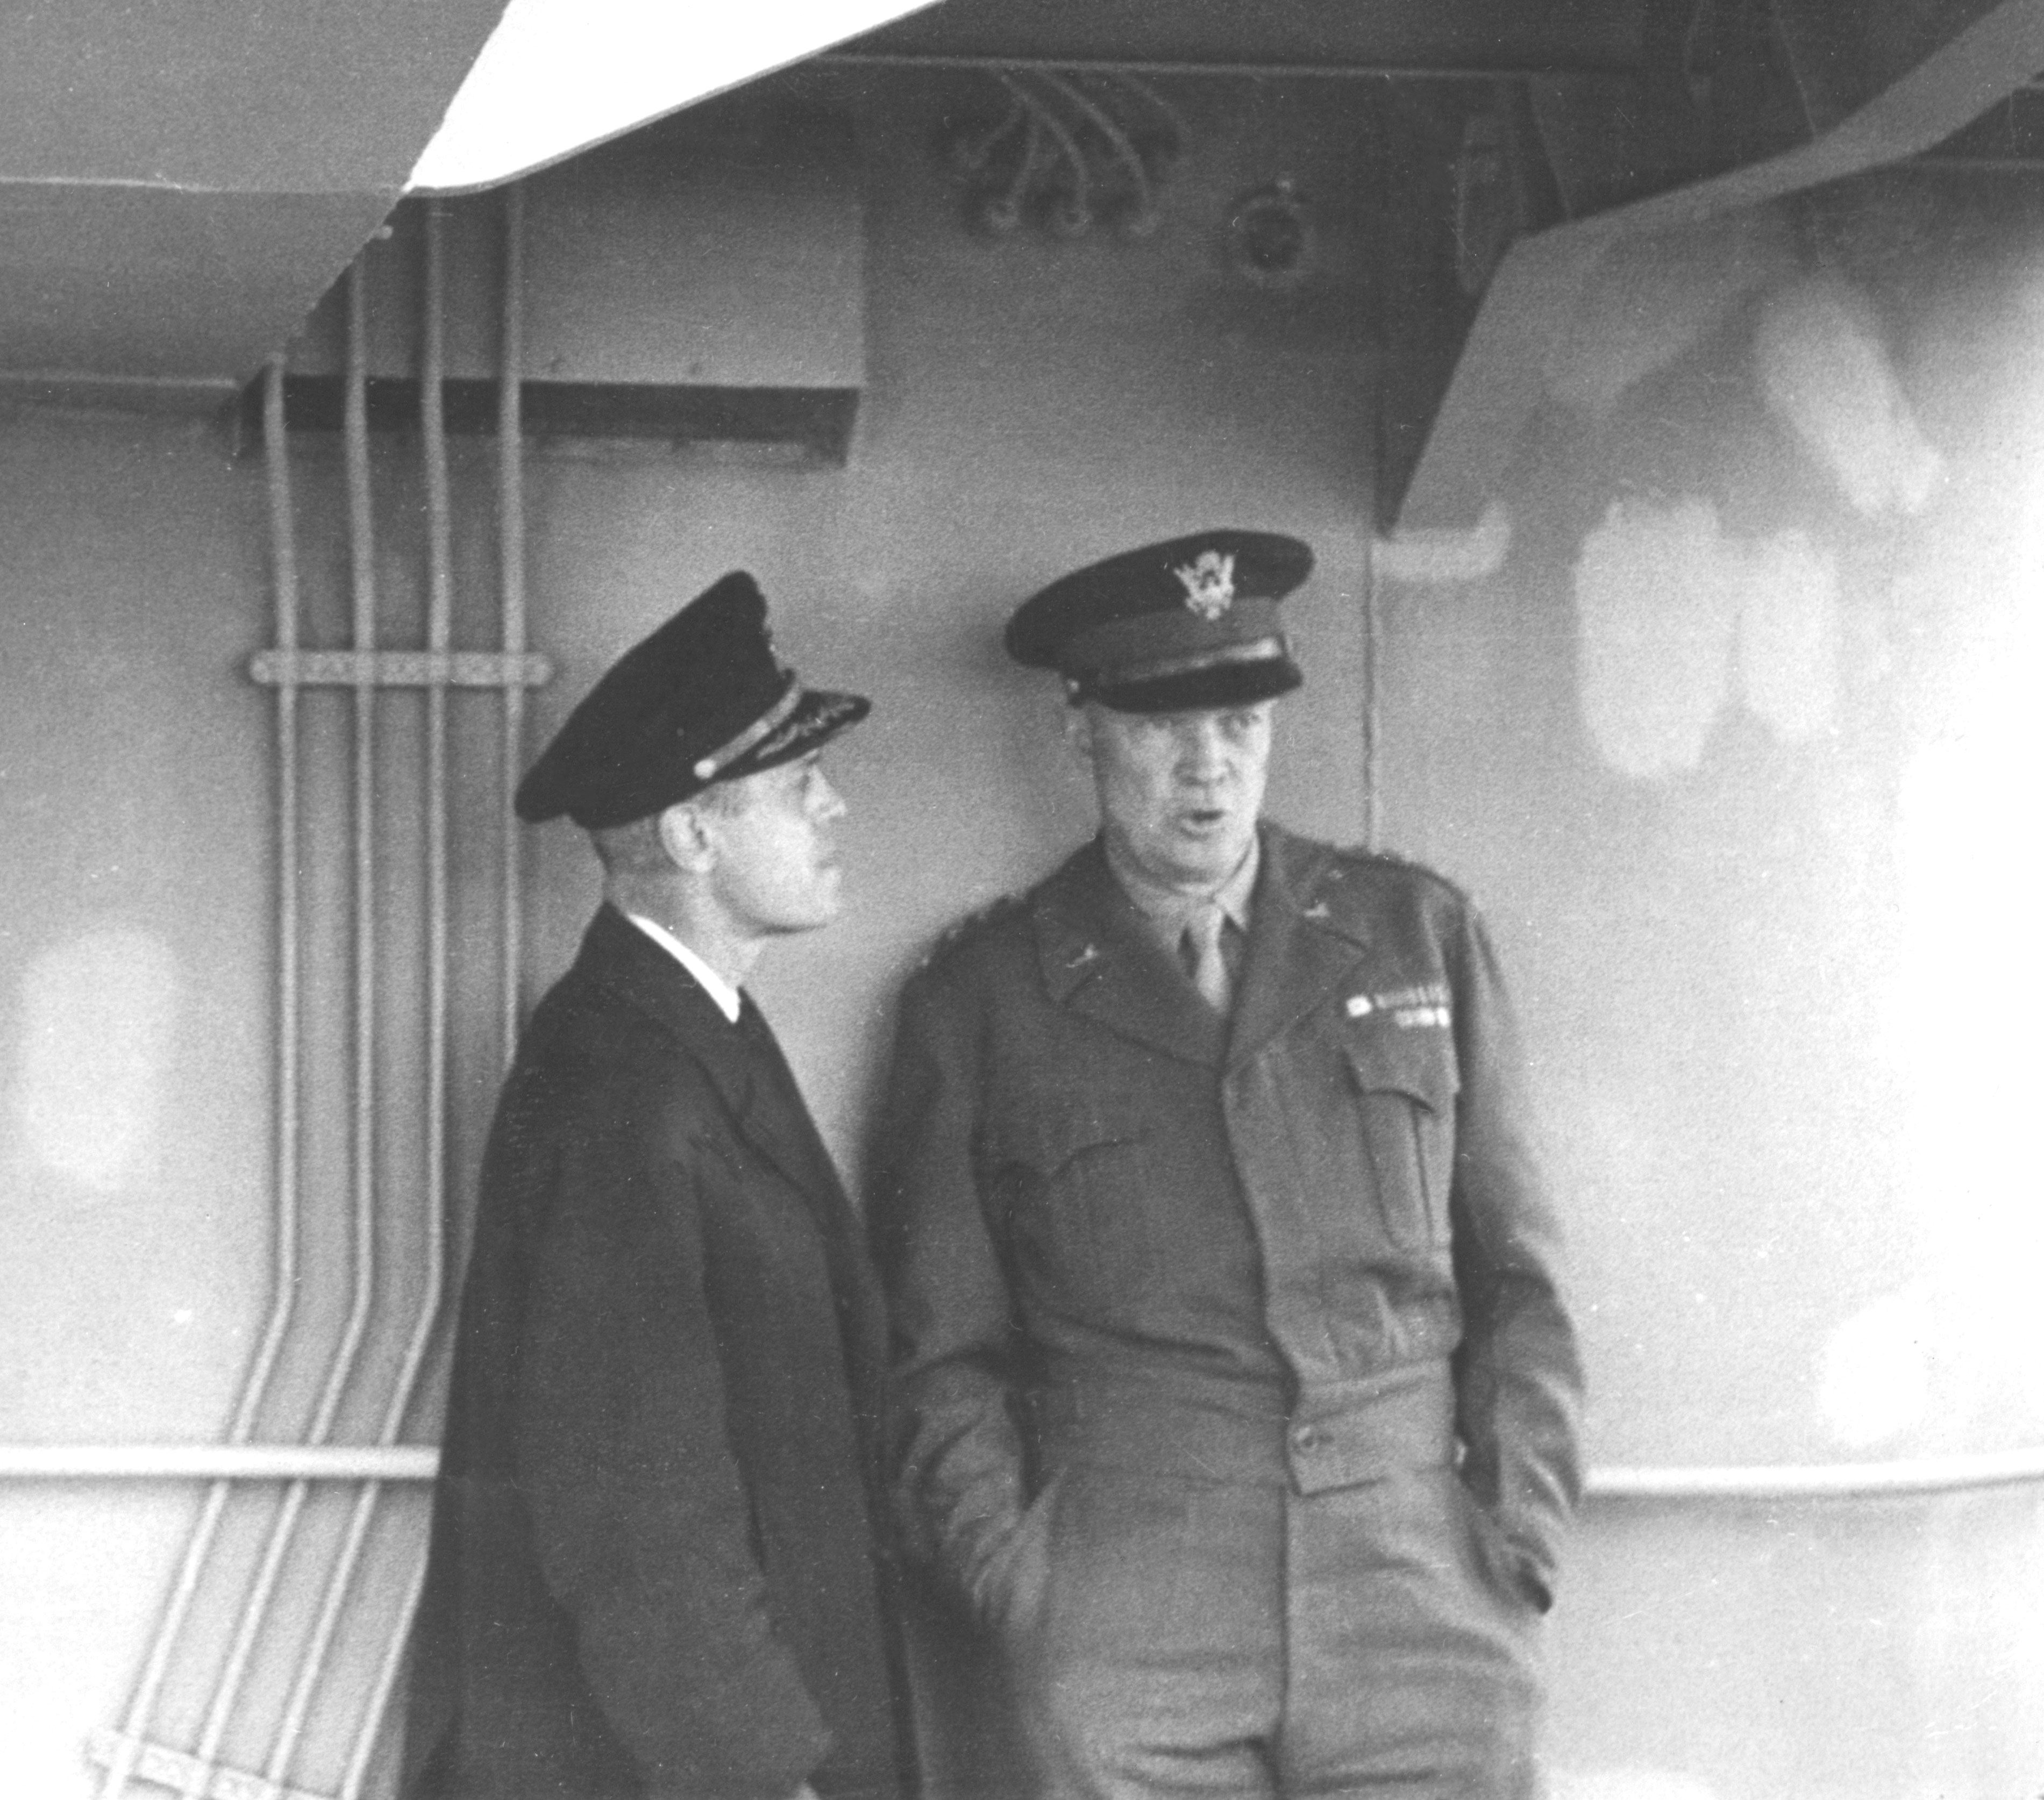 Naval Reserve Captain Edmond J. Moran receives urgent and specific instructions from Supreme Allied Commander Europe General Dwight D. Eisenhower on board the destroyer USS Thompson after D-Day. The general ordered Moran back to the United States “for more supplies and equipment to keep the invasion going.”